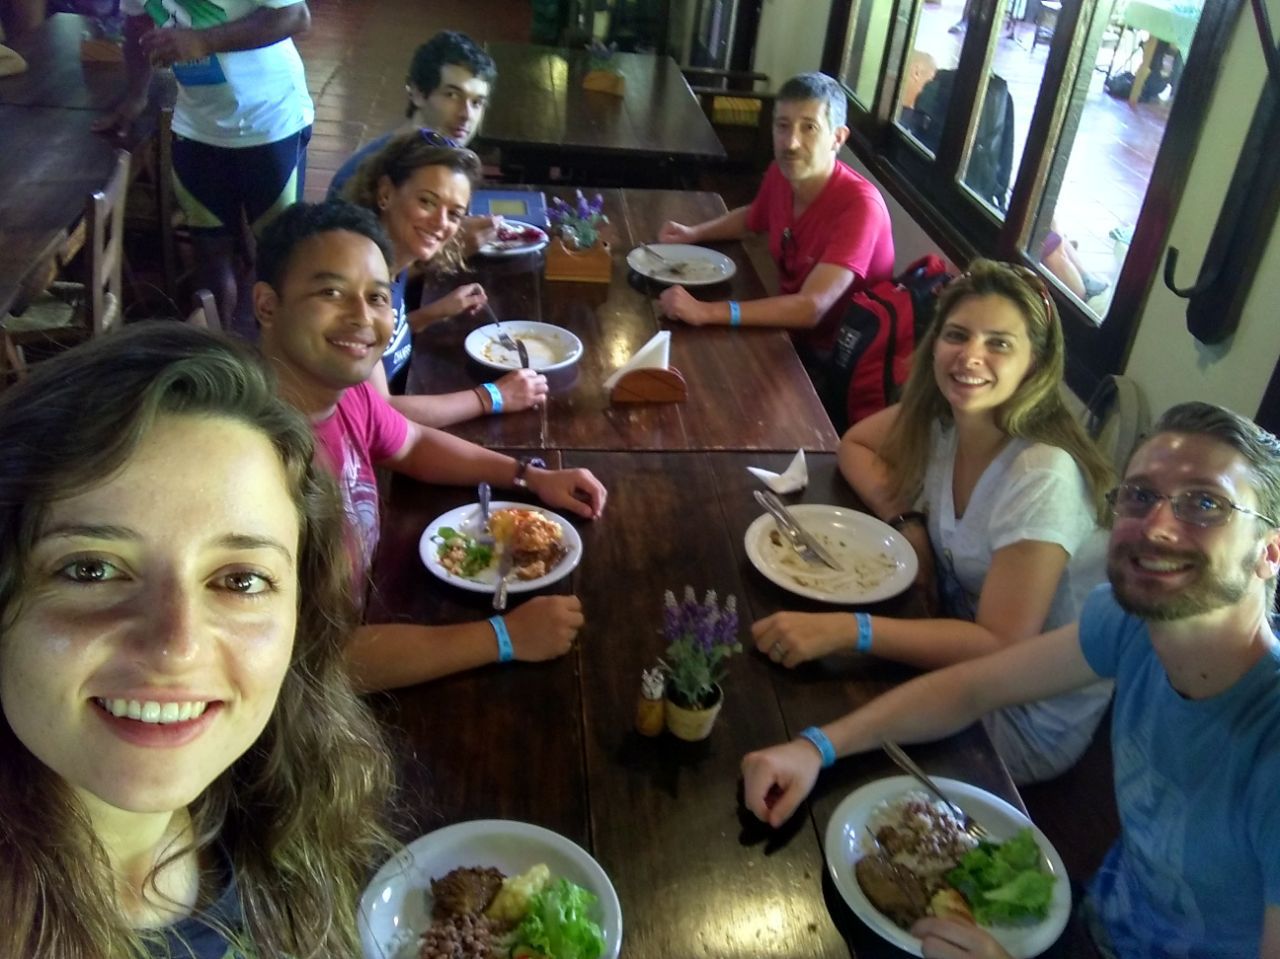 Photo by Paola Buoro during one of our meals. Sometimes a selfie is worthwhile :).